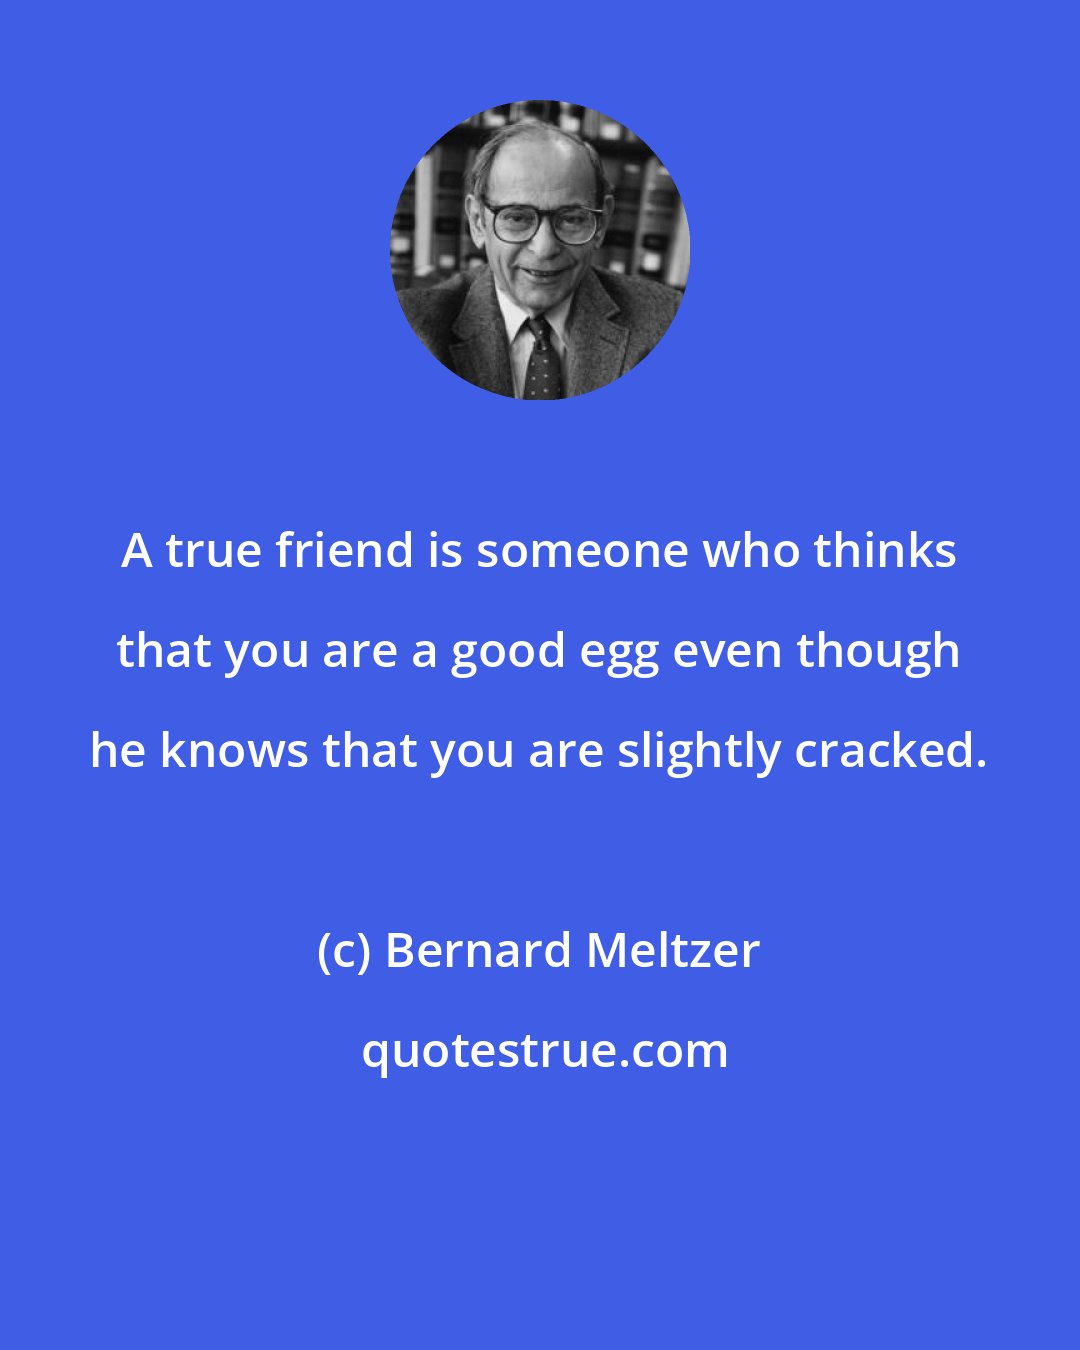 Bernard Meltzer: A true friend is someone who thinks that you are a good egg even though he knows that you are slightly cracked.